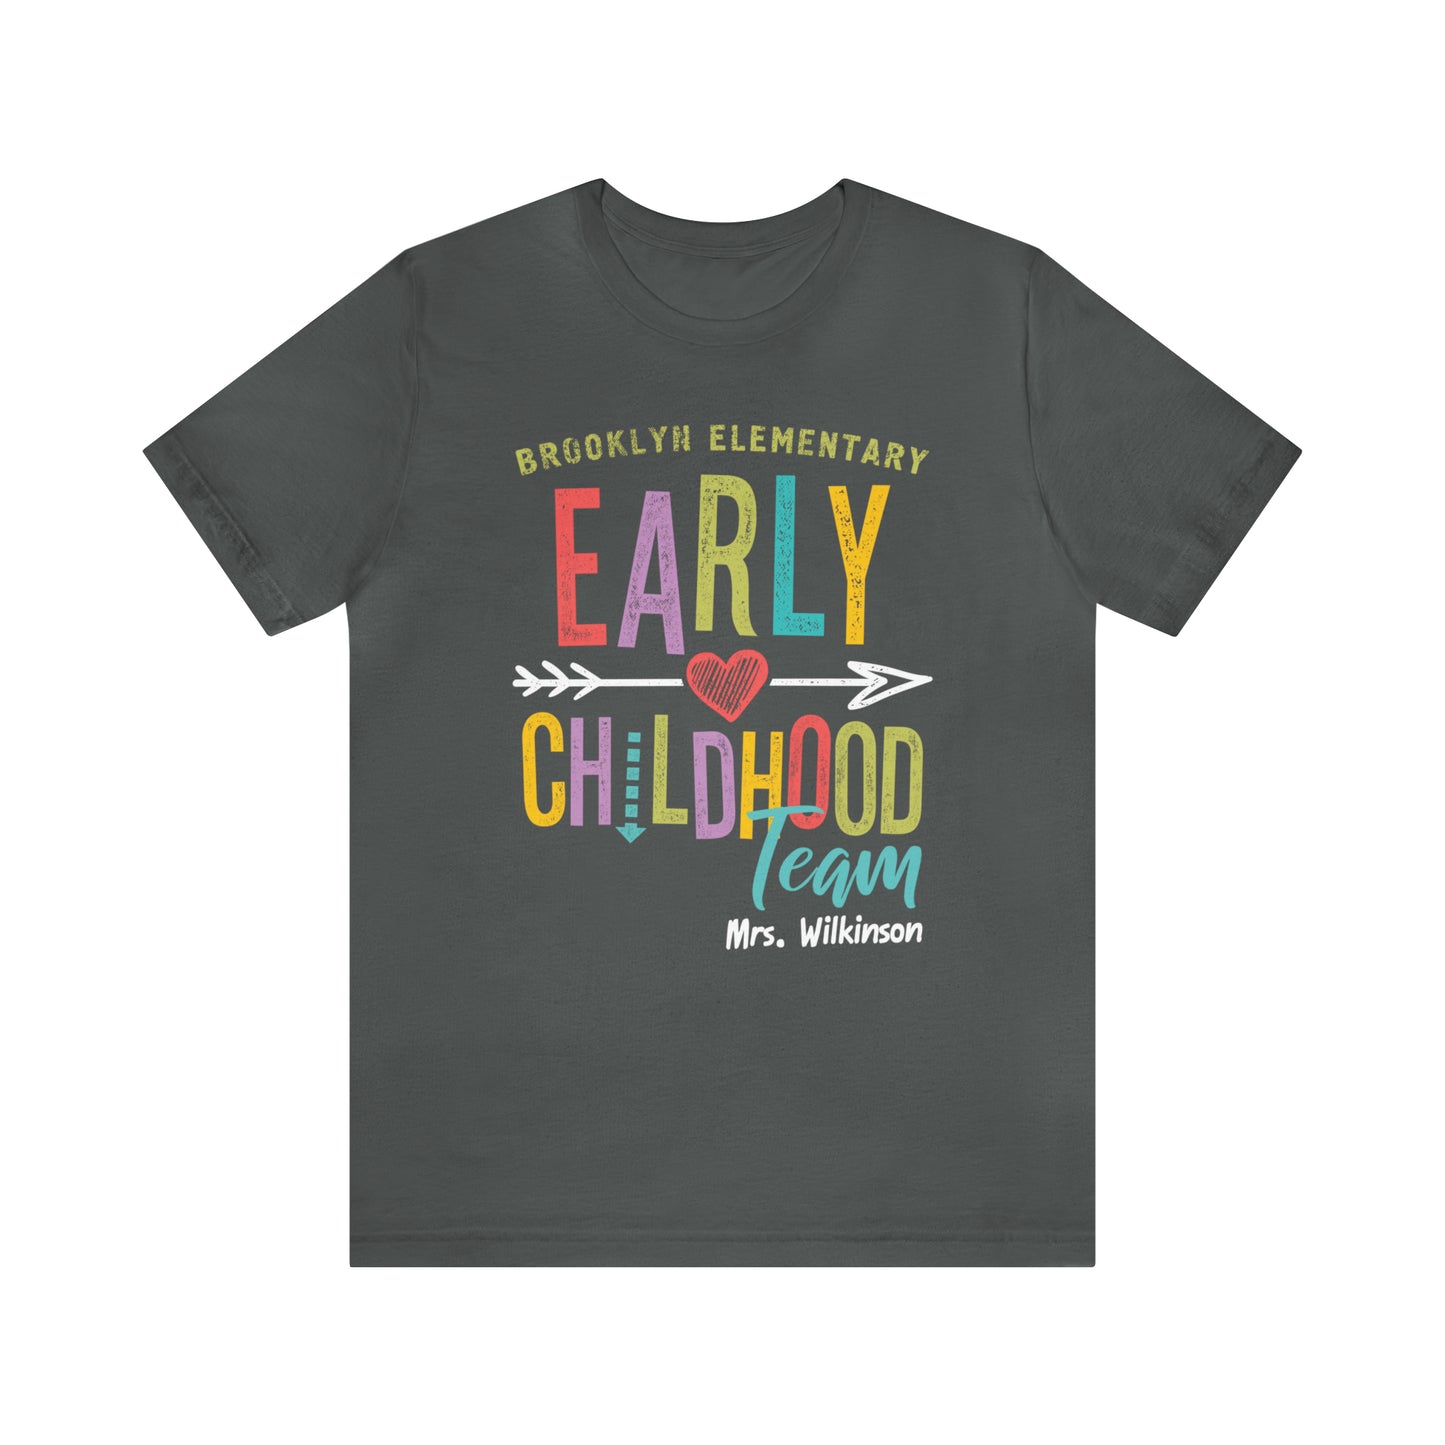 Early Childhood Teacher Team Shirt - Personalized any School and Teacher Name